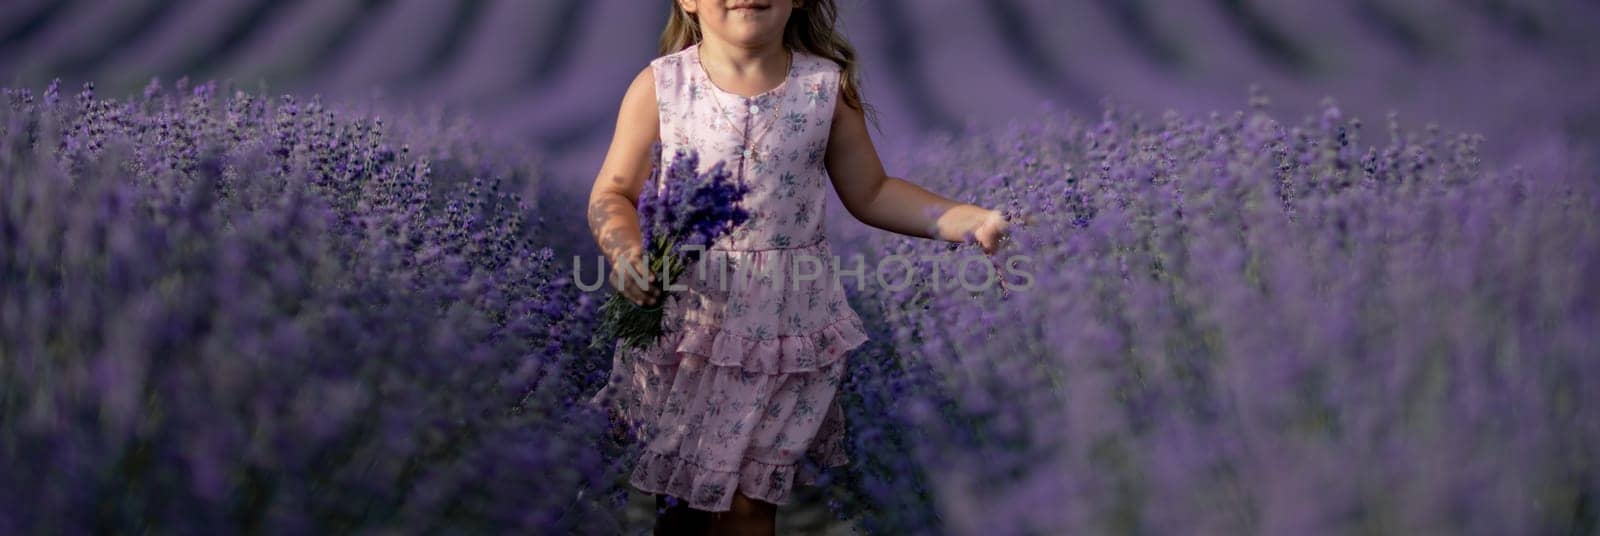 Lavender field girl. happy girl in pink dress in a lilac field of lavender. Aromatherapy concept, lavender oil, photo session in lavender by Matiunina